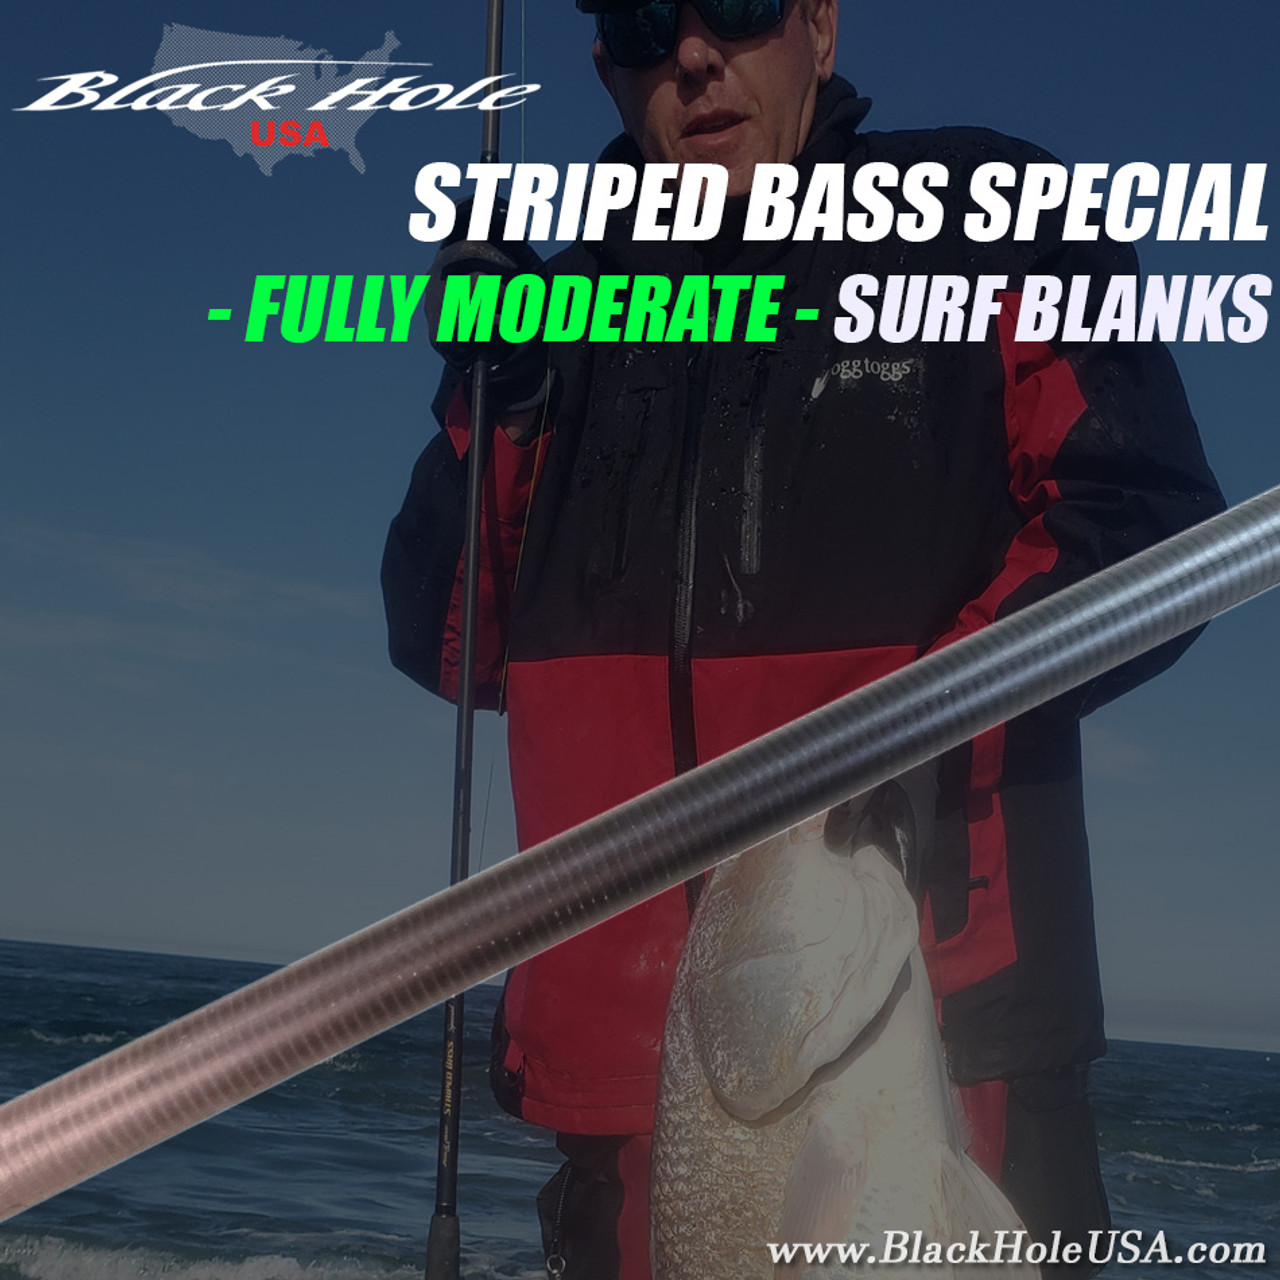 https://cdn11.bigcommerce.com/s-d32ed/images/stencil/1280x1280/products/799/3880/BH_STRIPED_BASS_BLANK_FRONT_FULLY_MODERATE_ACTION__64554.1675204475.jpg?c=2